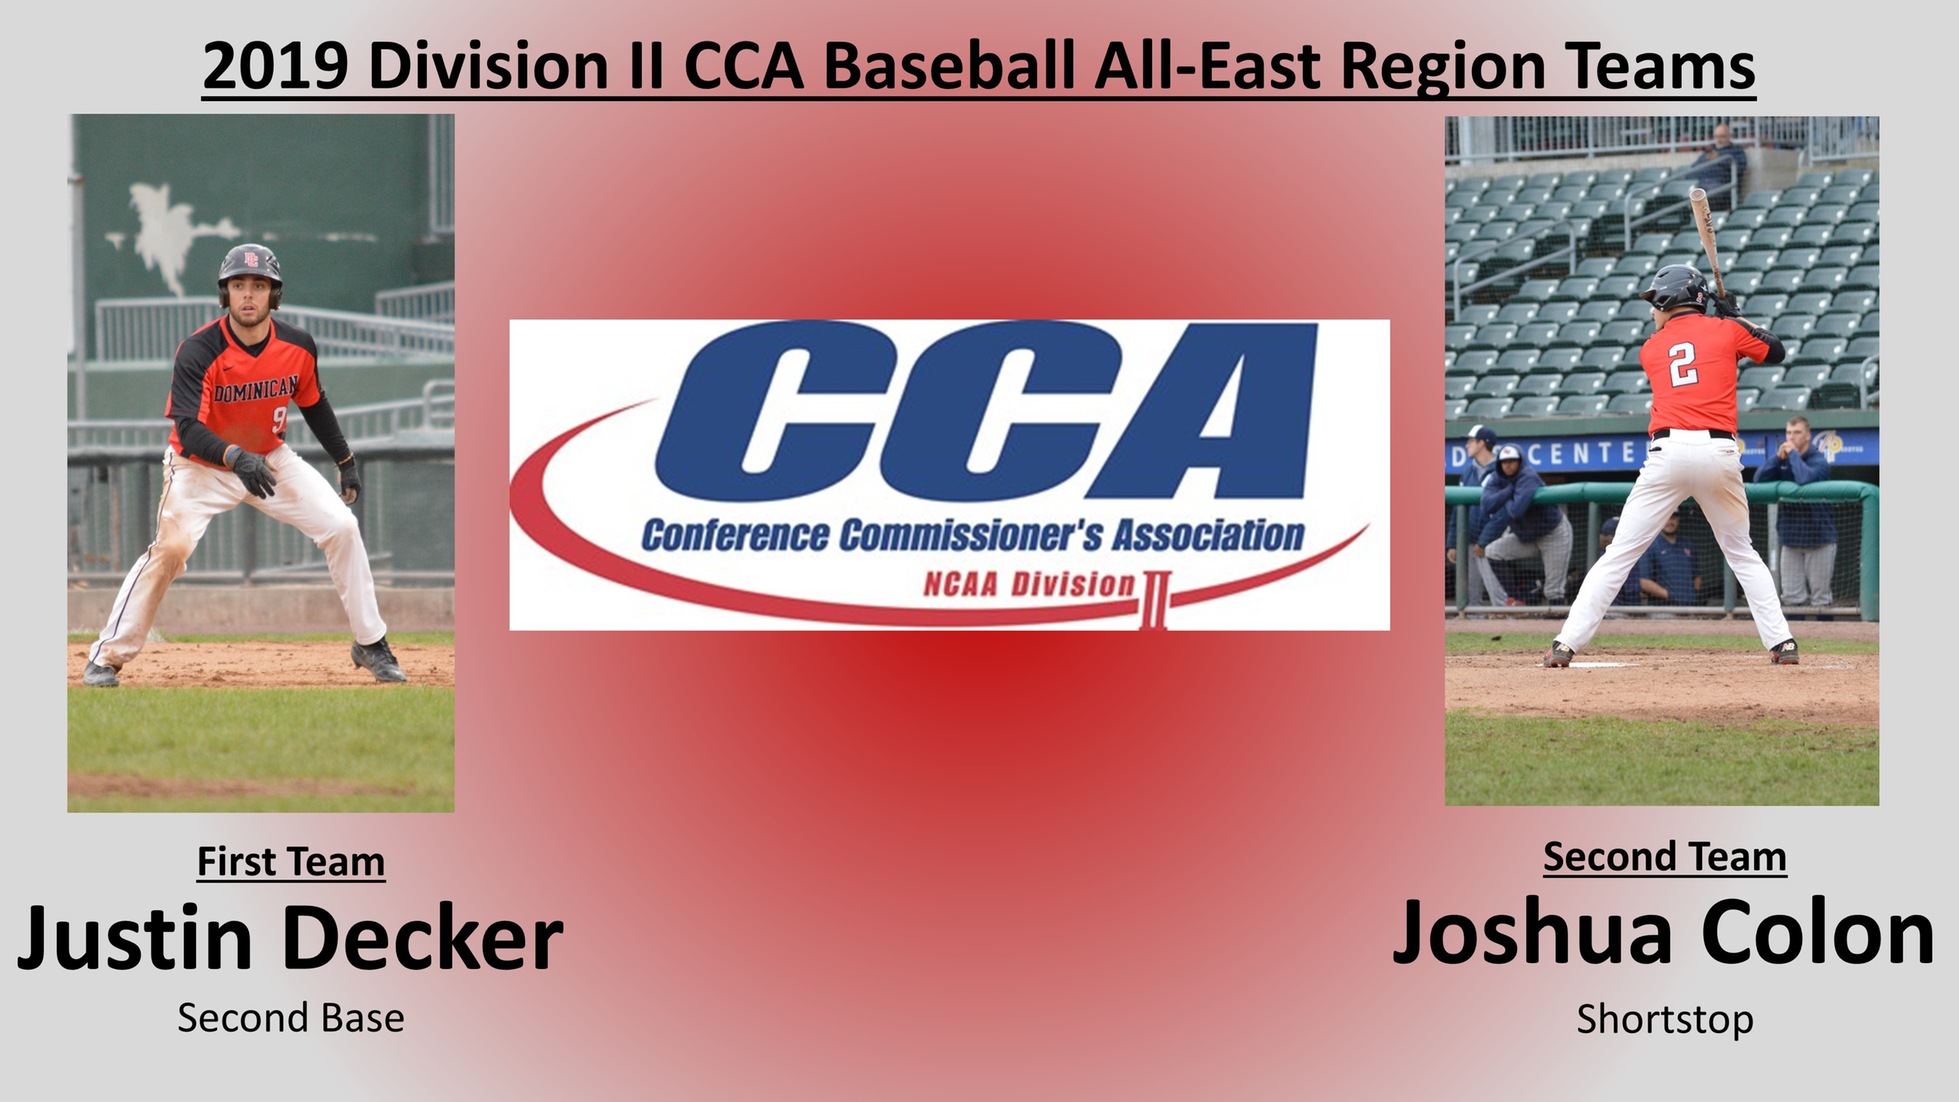 DECKER AND COLON NAMED TO D2CCA BASEBALL ALL-EAST REGION TEAMS